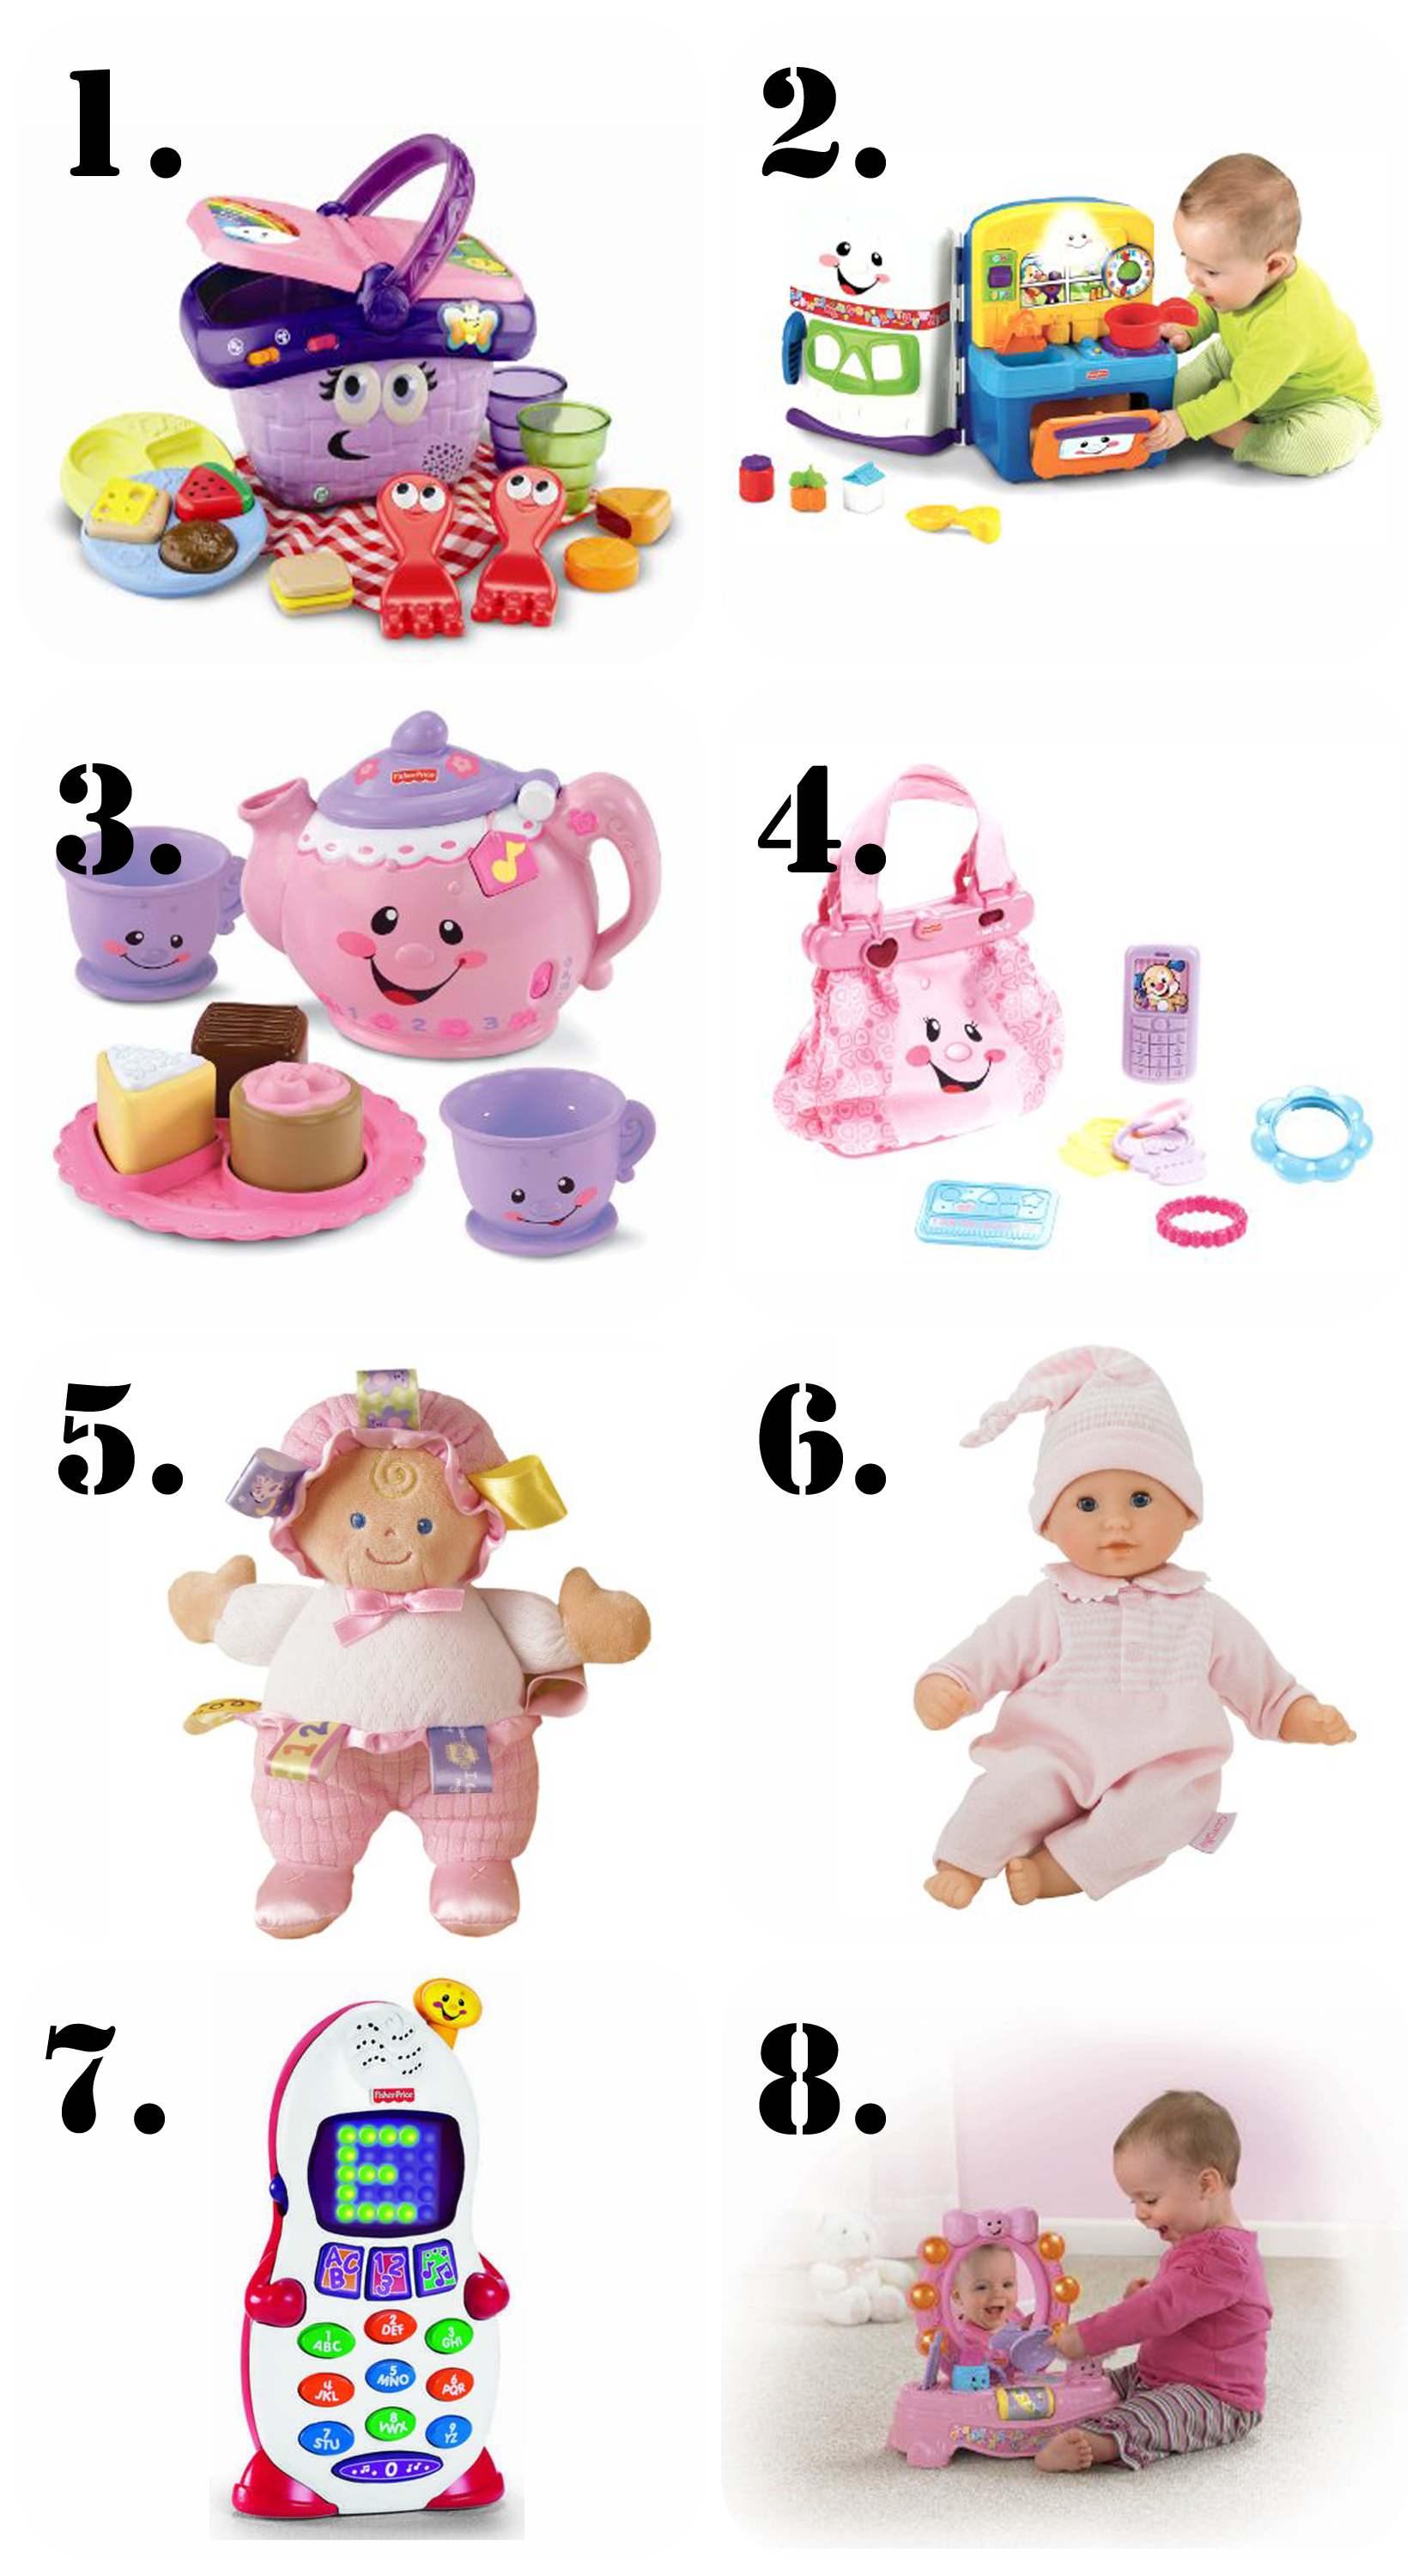 The Ultimate Gift List for a 1 Year Old Girl!